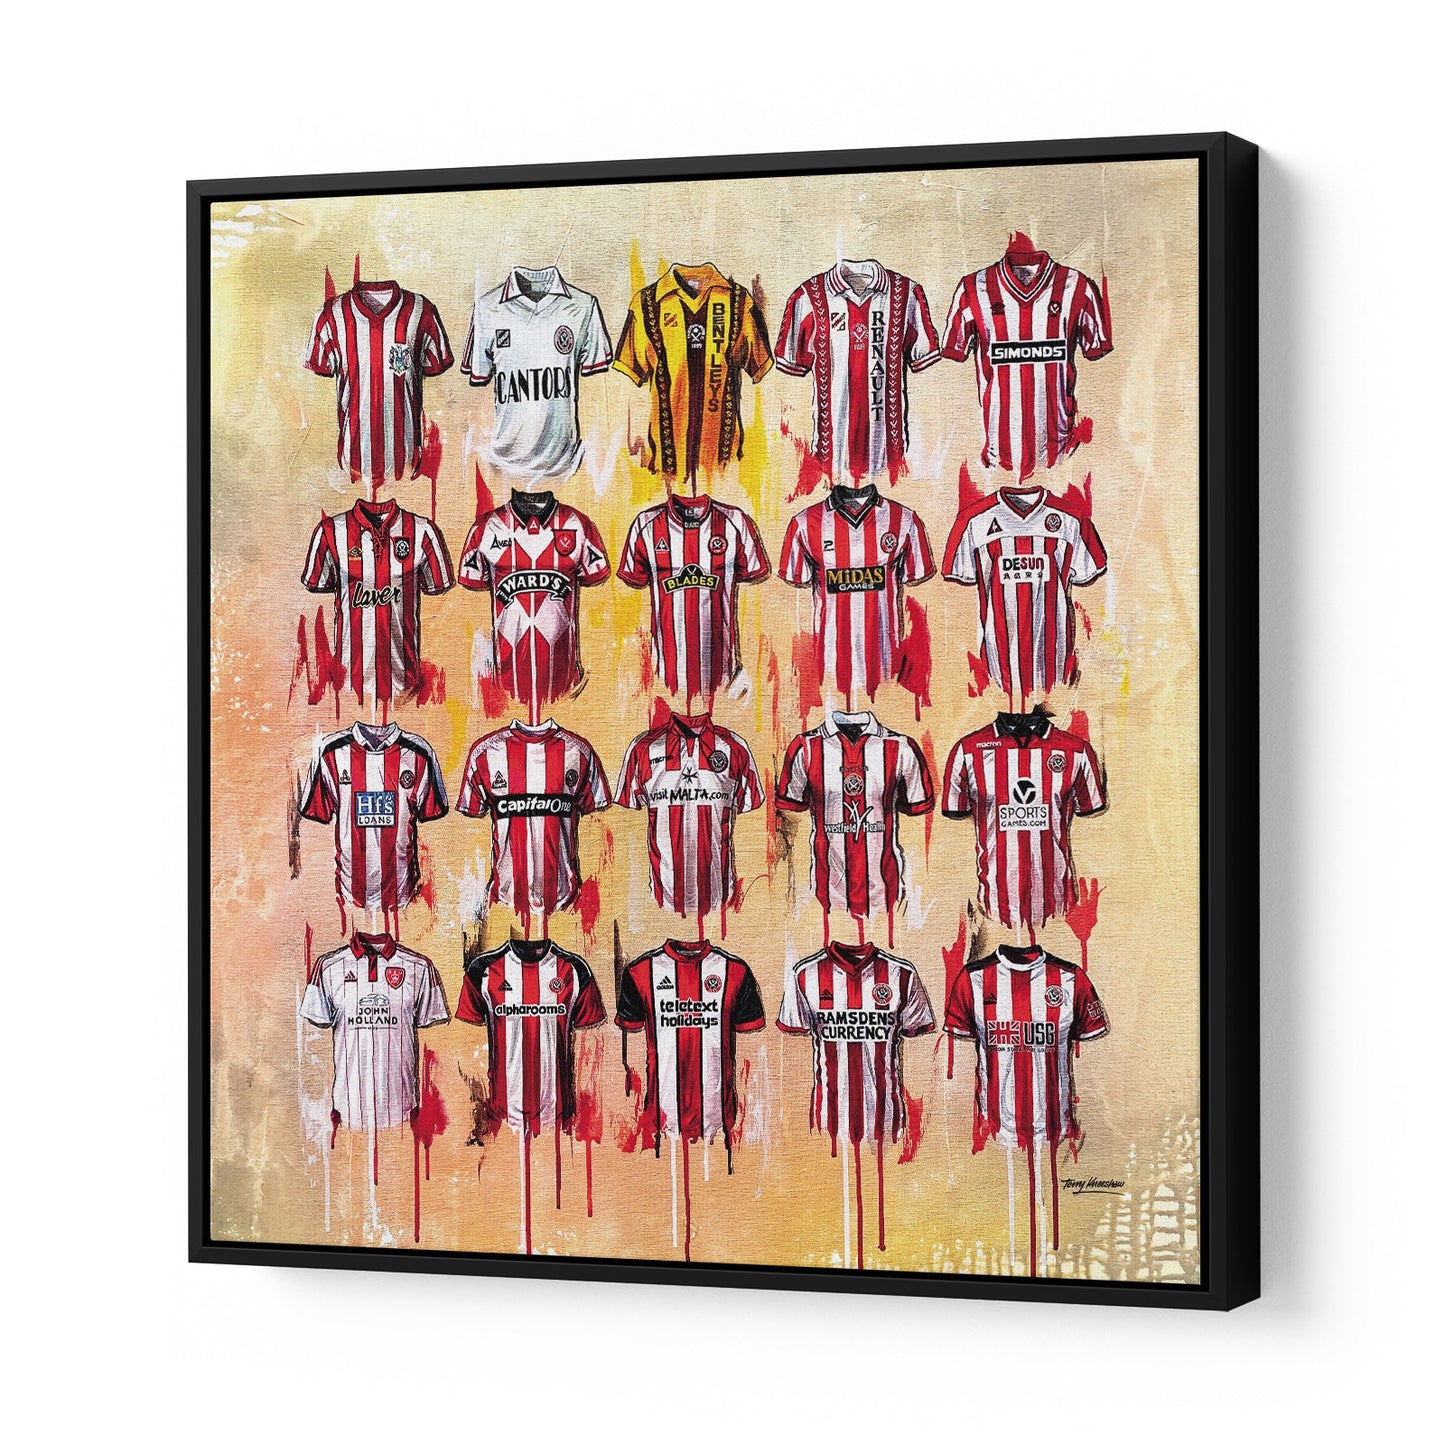 Capture the essence of Sheffield United with Terry Kneeshaw's Canvases, available in various sizes (20x20, 30x30, or 40x40) and framed or unframed black floating frame. Featuring artwork of the team, these canvases are a must-have for fans. Each canvas showcases Sheffield United's iconic moments, symbols, and colors, ensuring that it is a true representation of the team's identity. Get your Sheffield United Canvases today and add them to your collection.